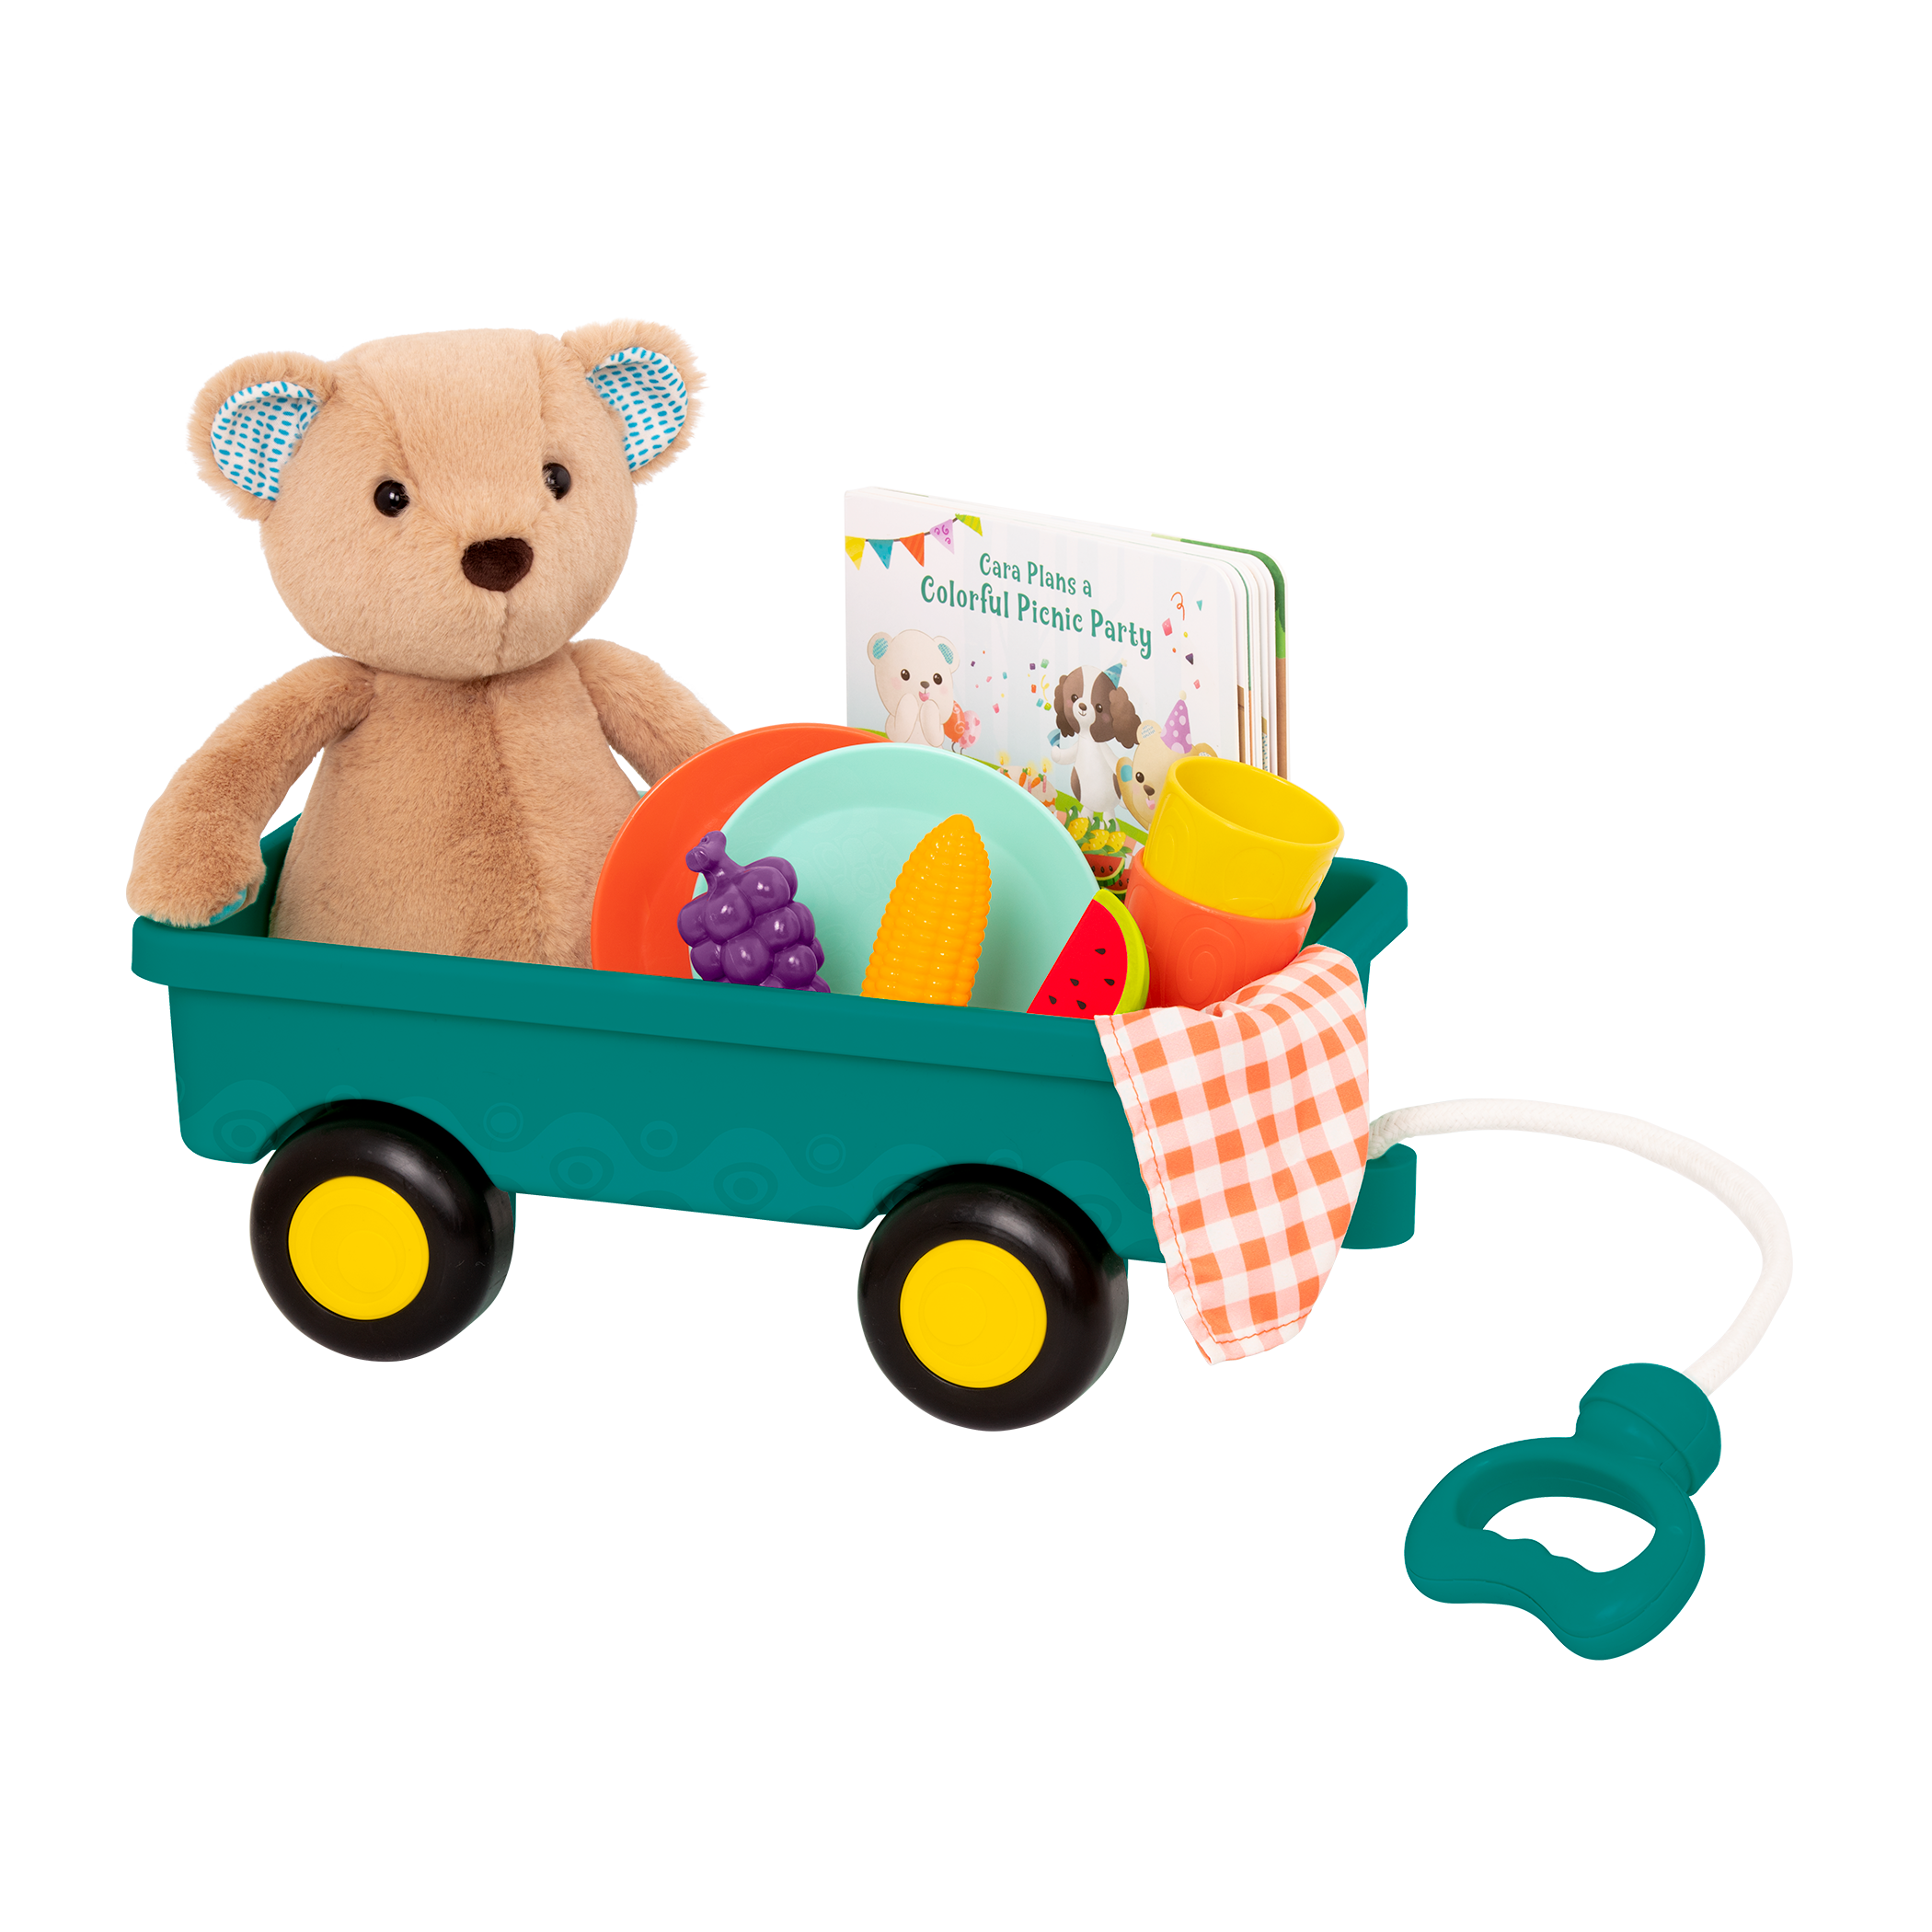 Plush bear with picnic playset and book.